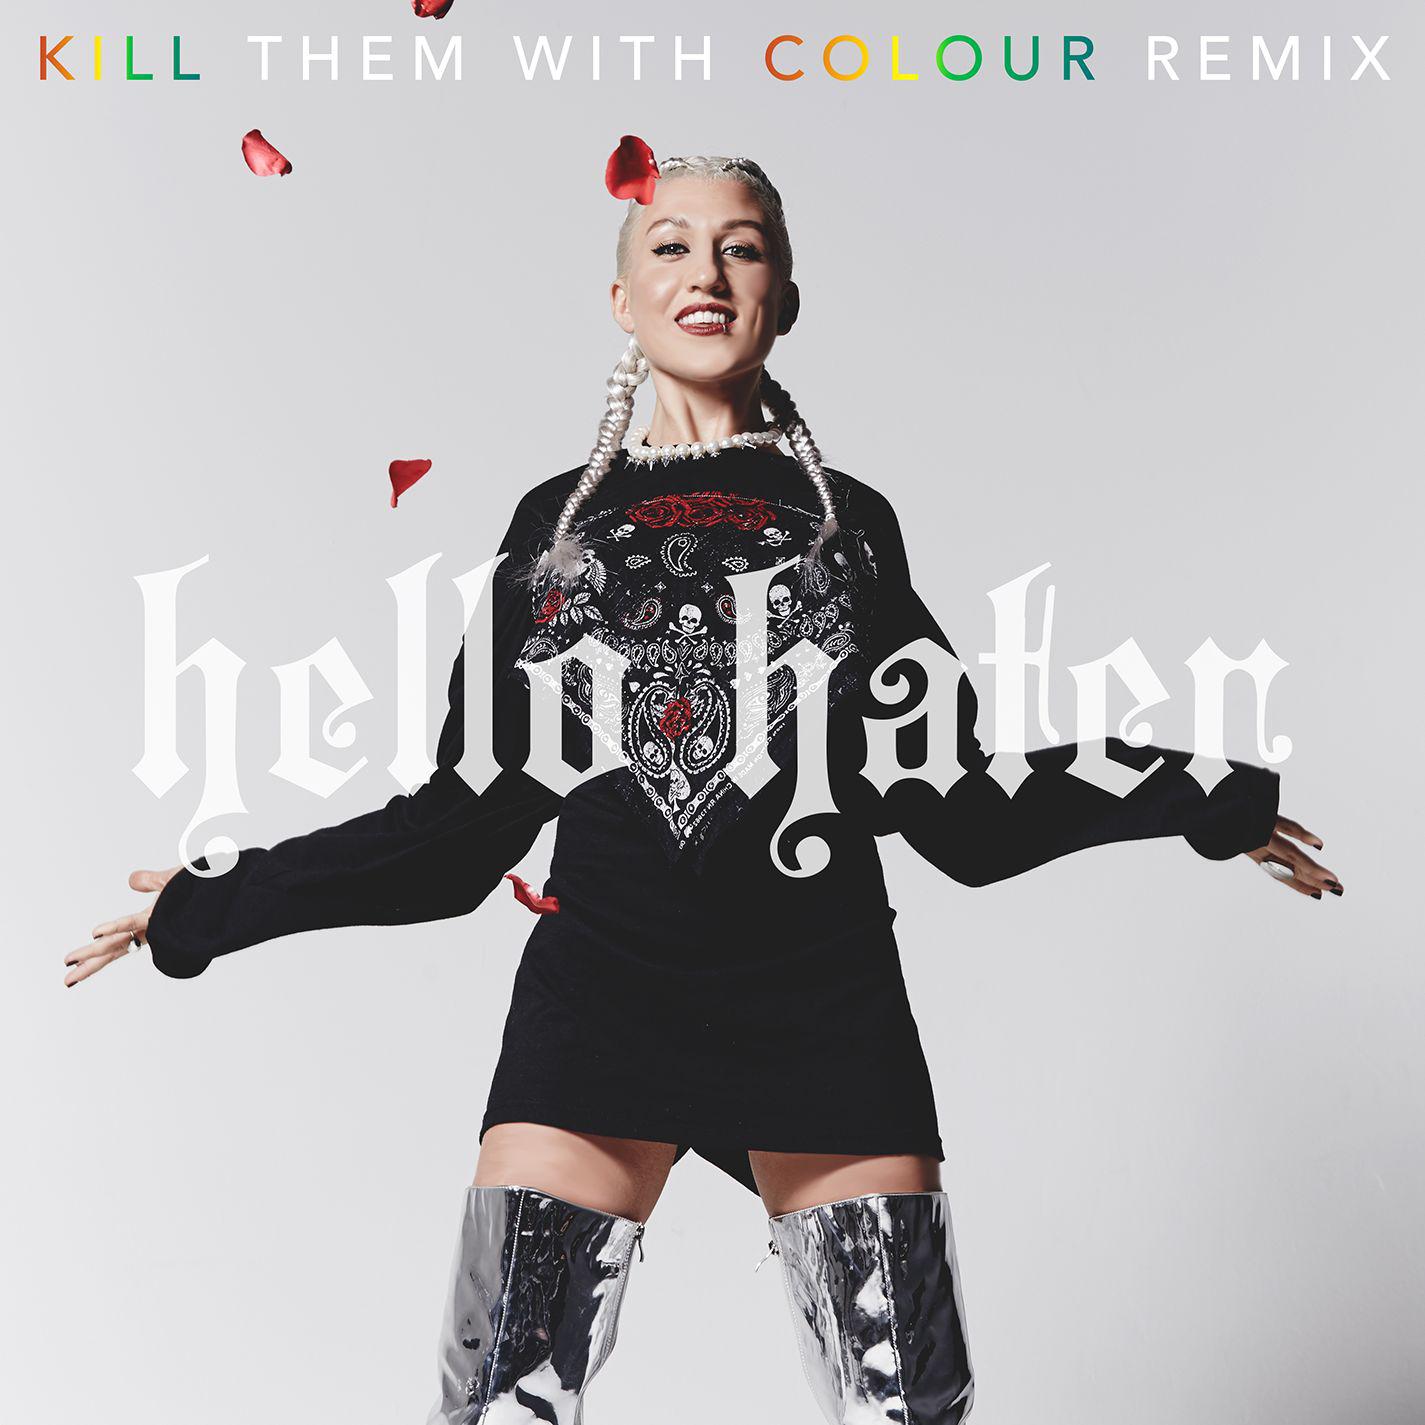 Hello Hater (Kill Them With Colour Remix)专辑